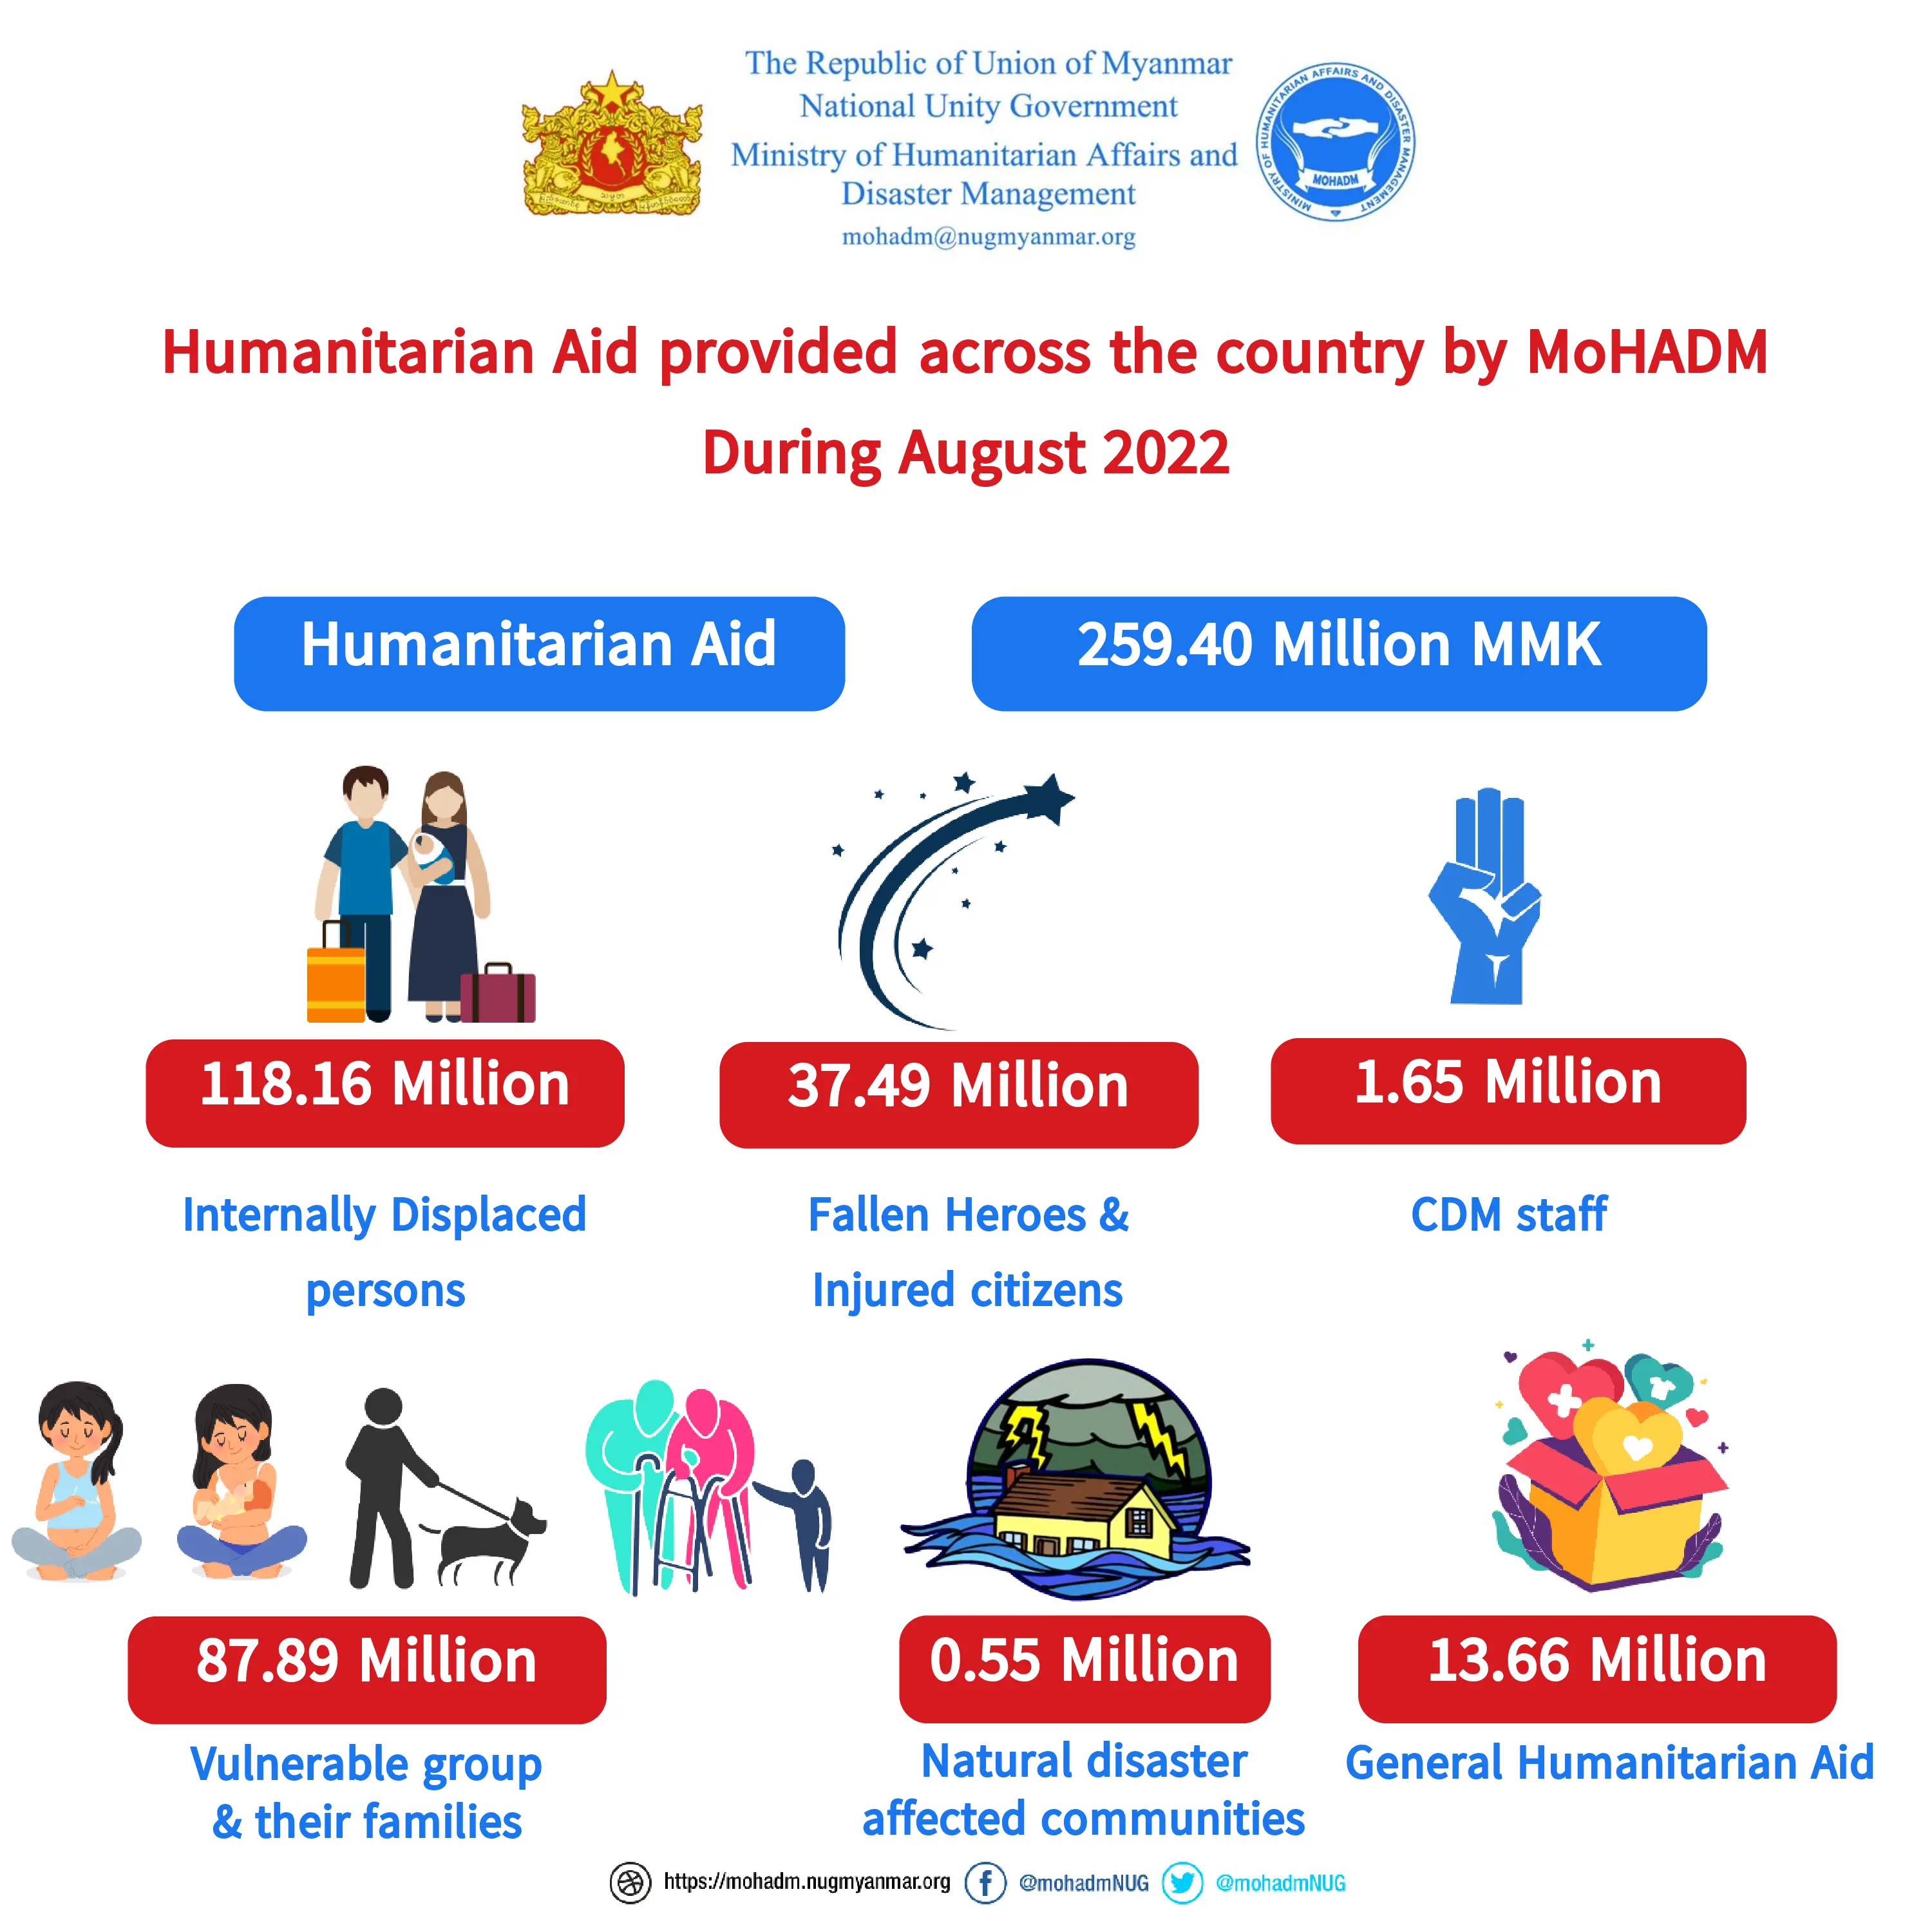 Summary of humanitarian aid provision by MoHADM (August 2022)